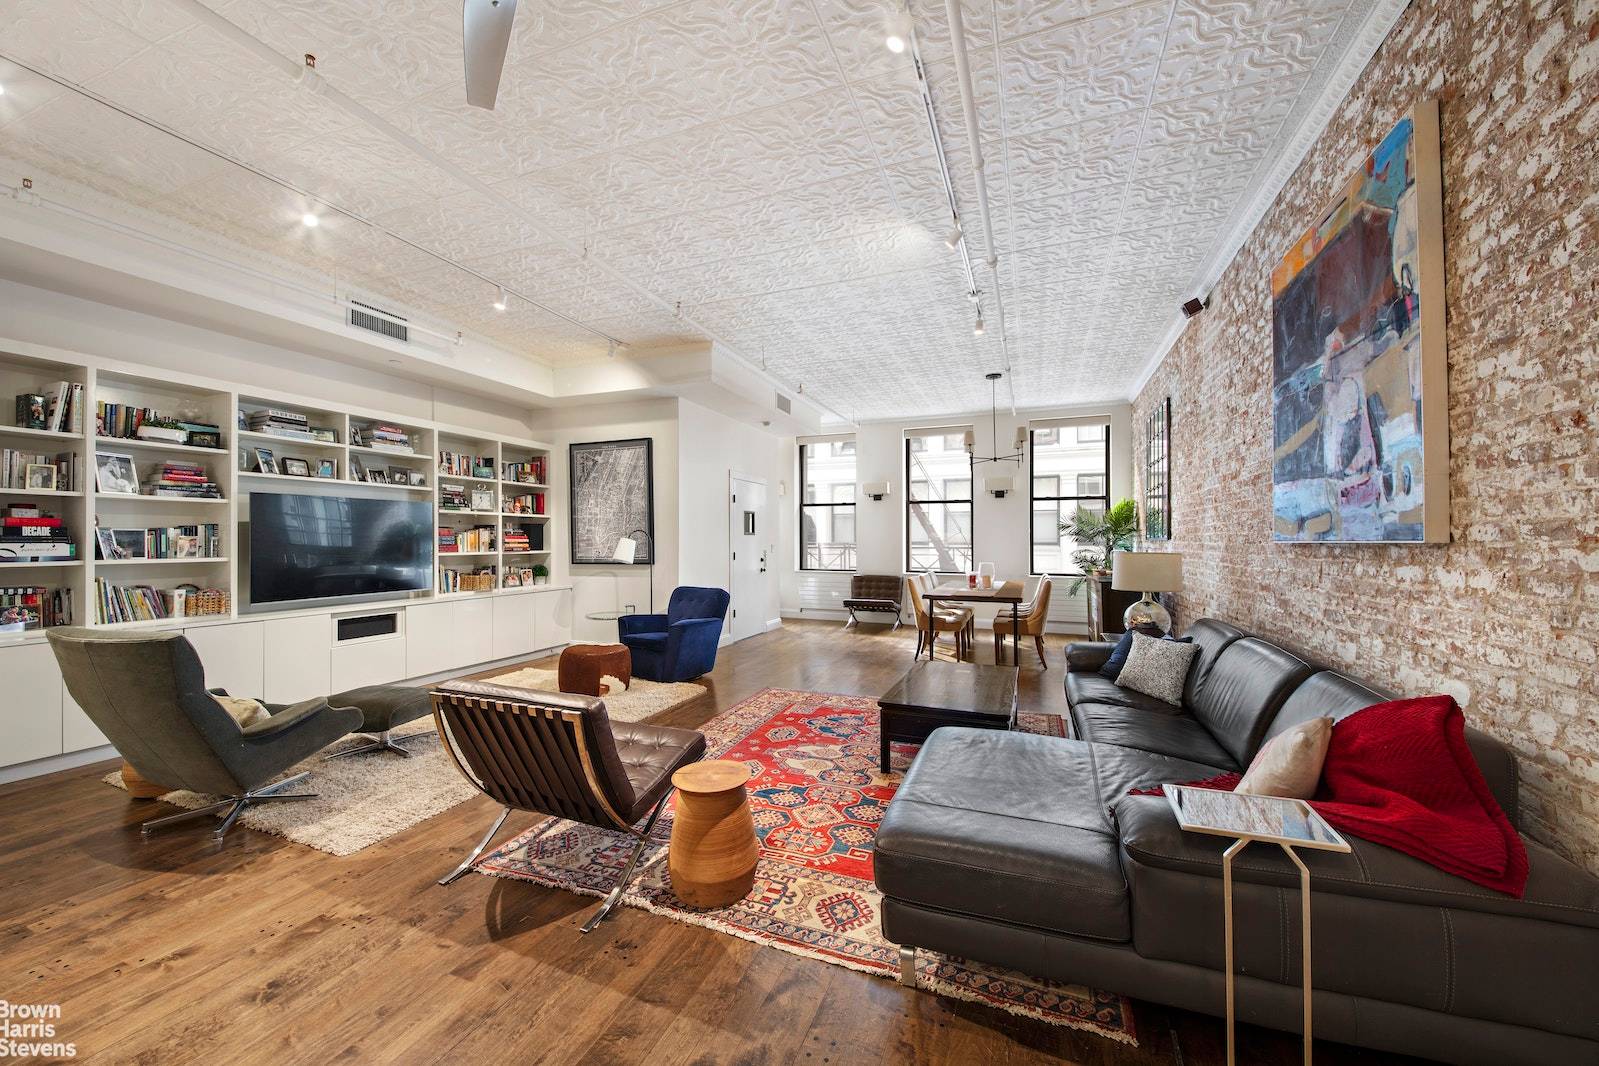 History and luxury mingle to stunning effect in this classic gut renovated full floor loft located right in the heart of Tribeca's burgeoning gallery district !